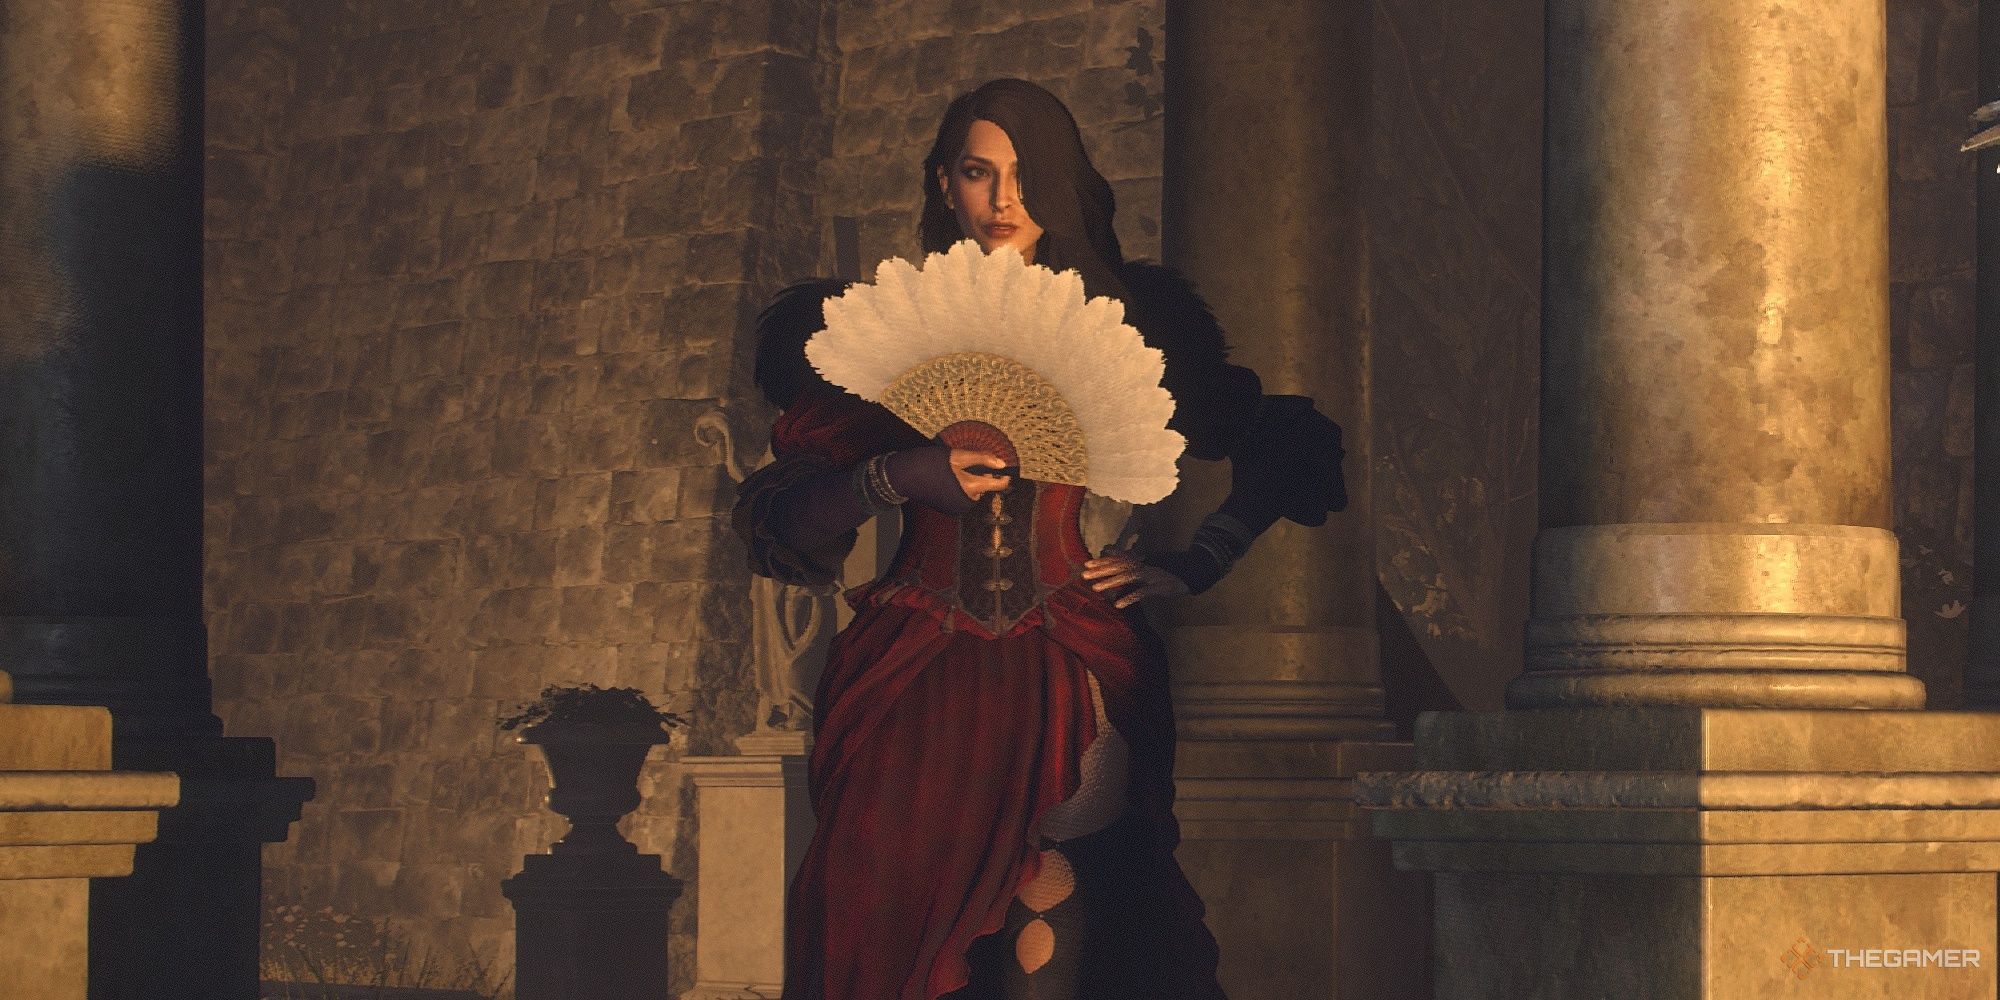 Wilhelmina waves her fan in front of her while talking in Dragon's Dogma 2.